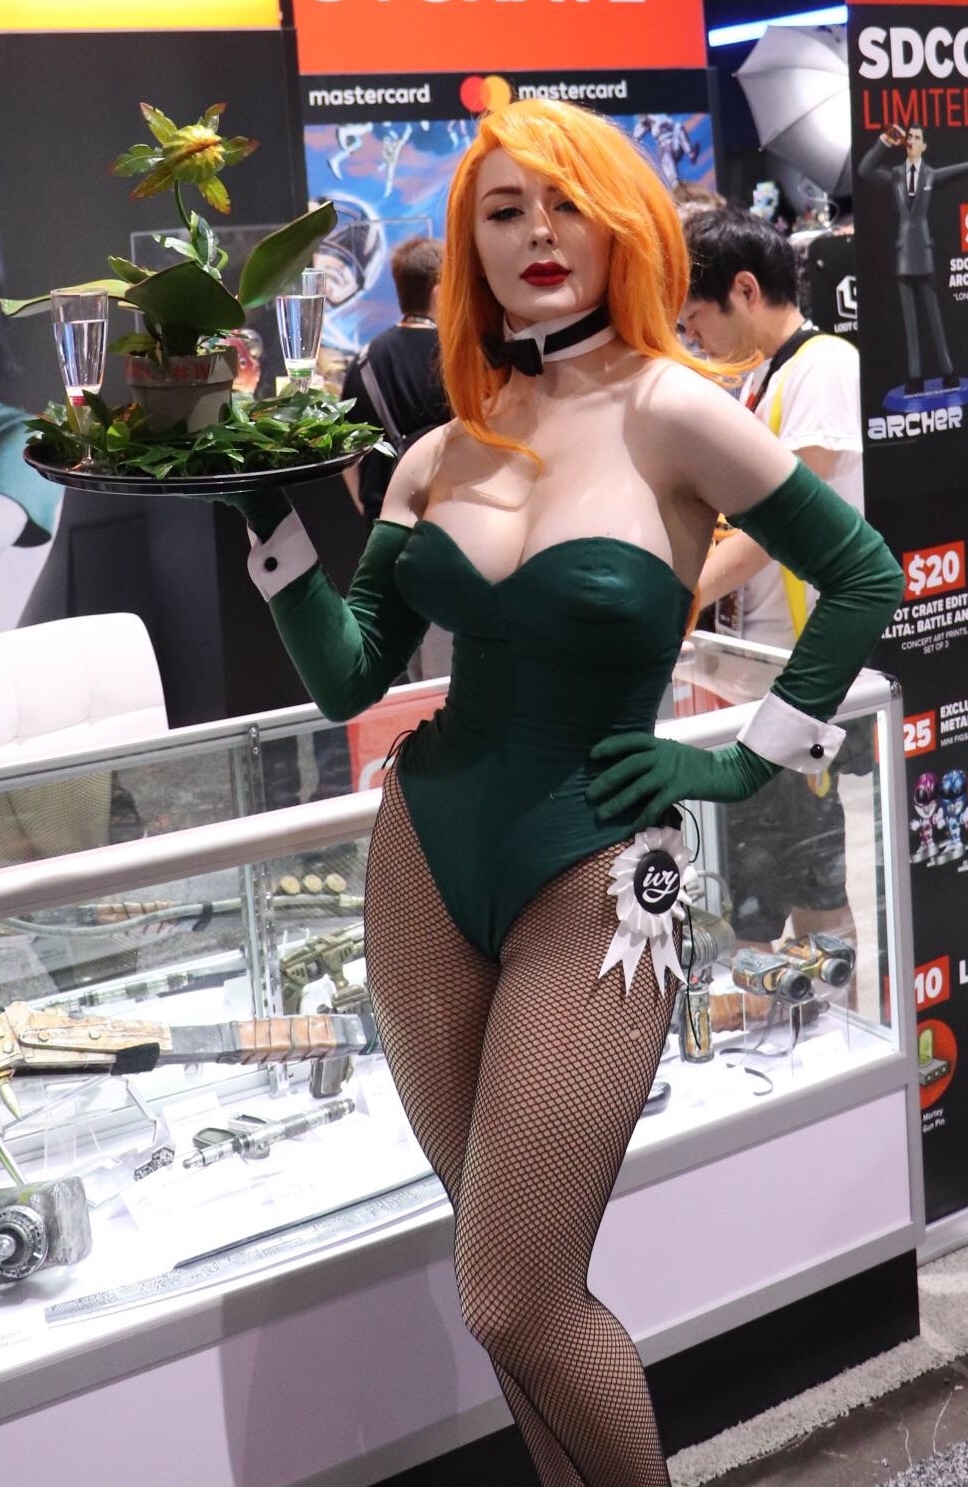 bombshell poison ivy cosplay - Sdcc Limited mastercard tercard Spa Archer $20 To